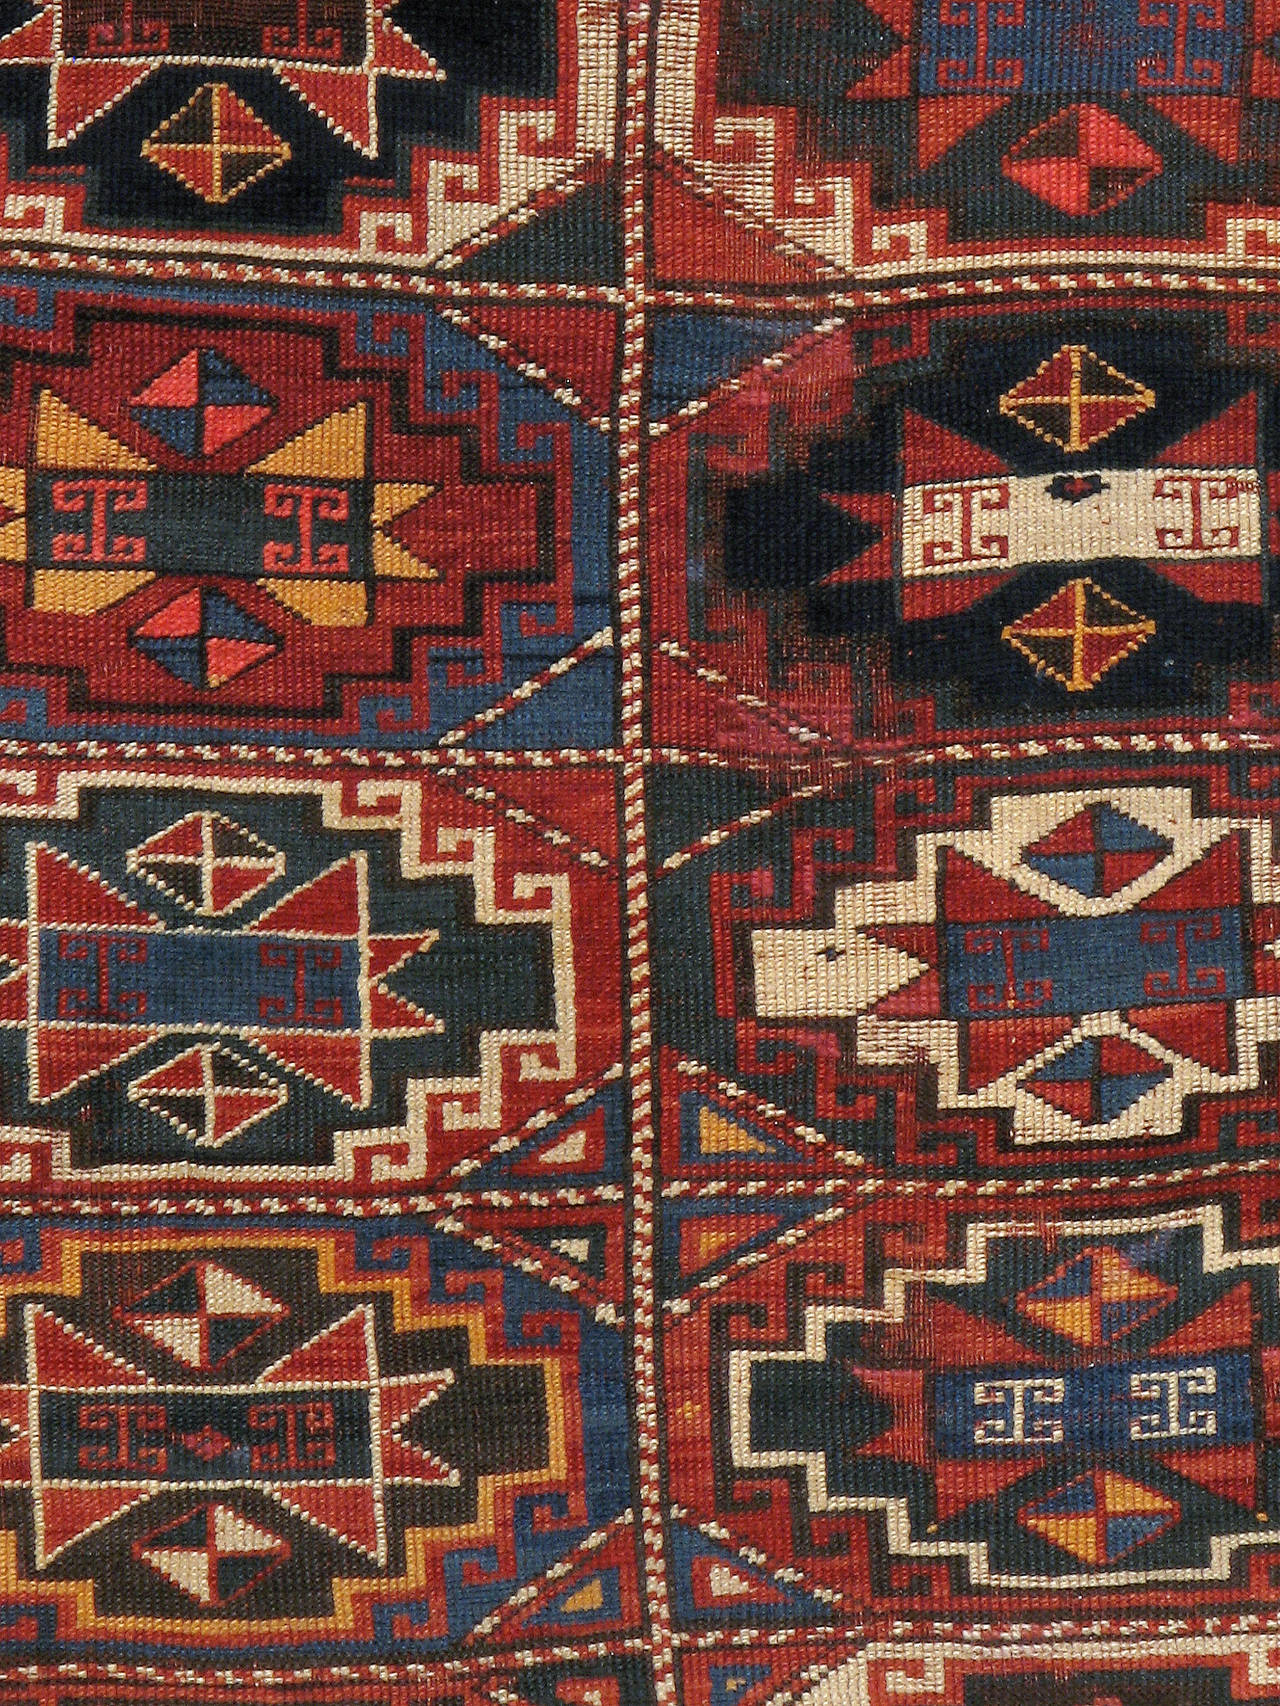 An antique Caucasian Kazak carpet from the turn of the 20th century.